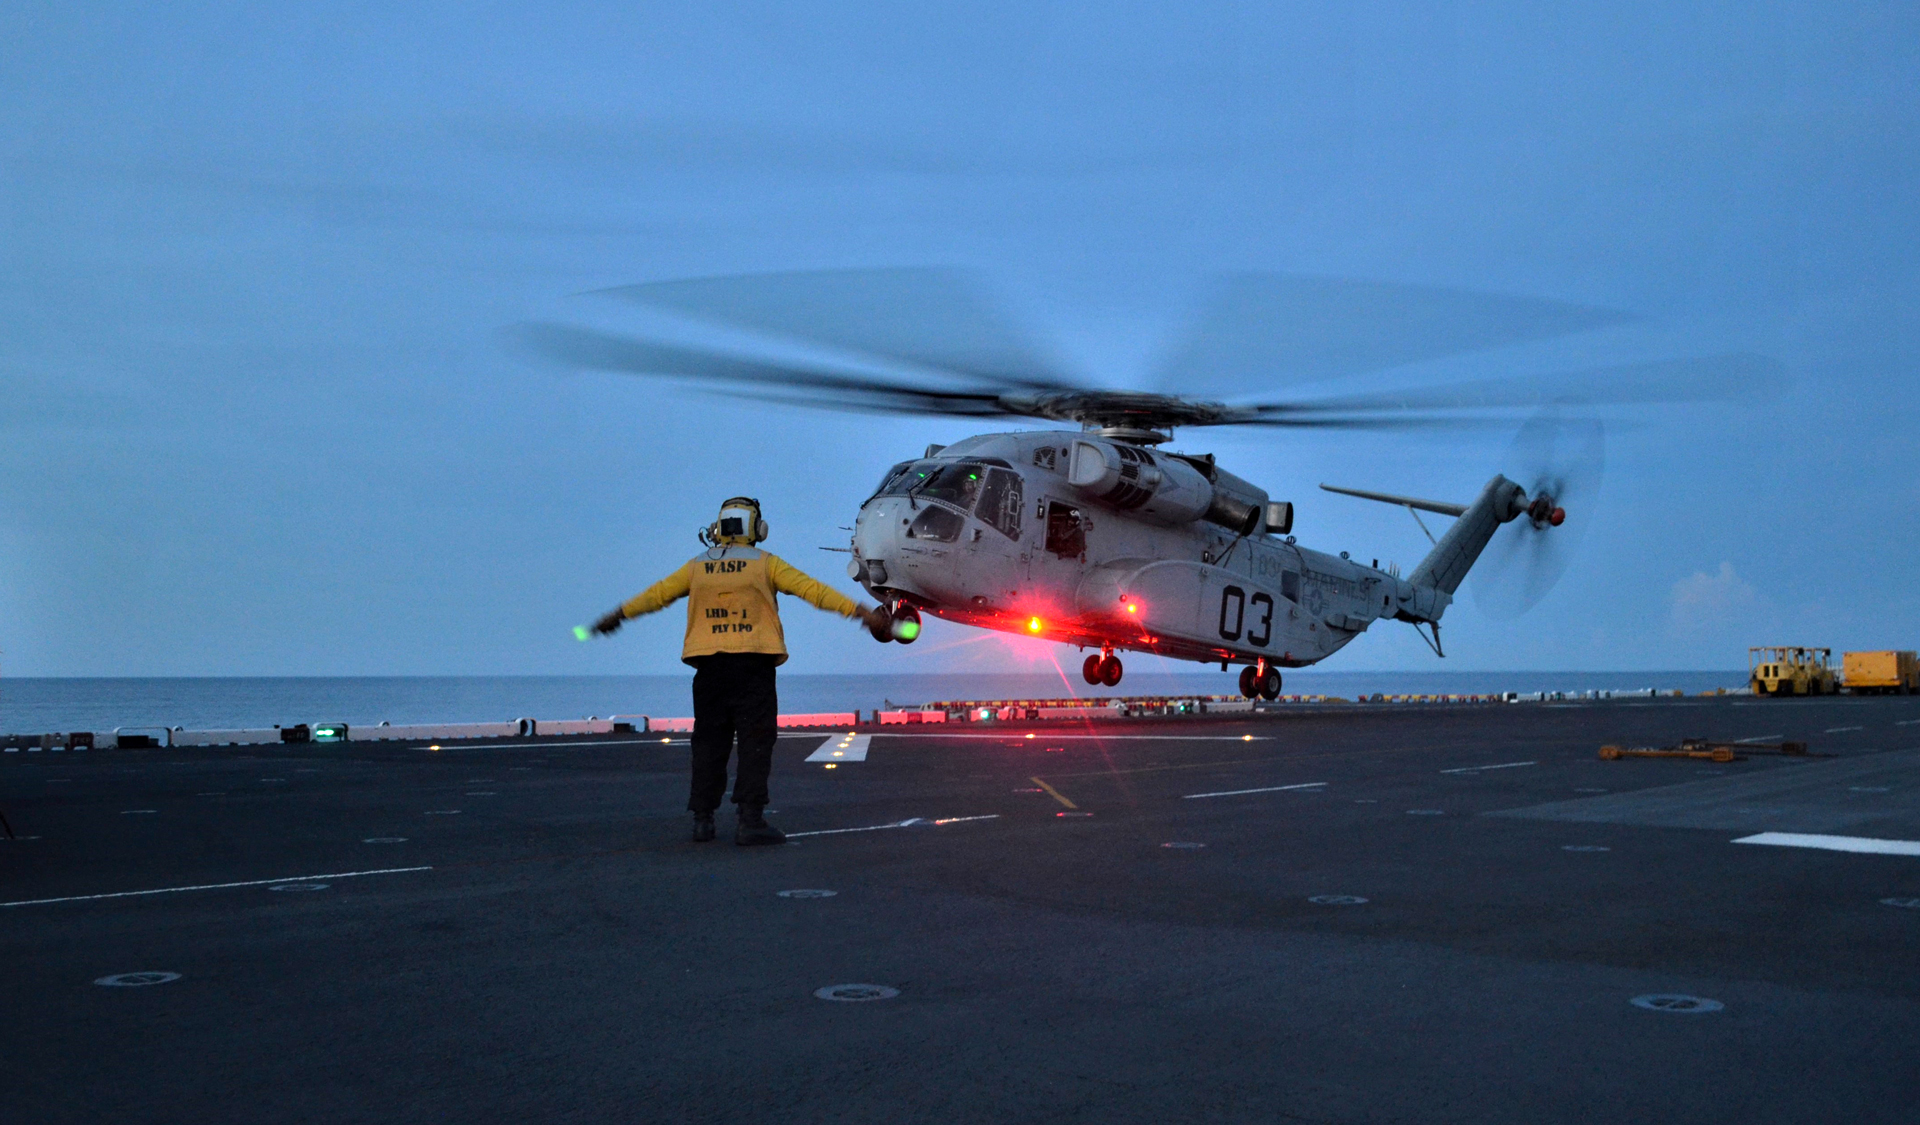 The CH-53K completed landings and takeoffs day and night in varying wind conditions. (US Navy photo)